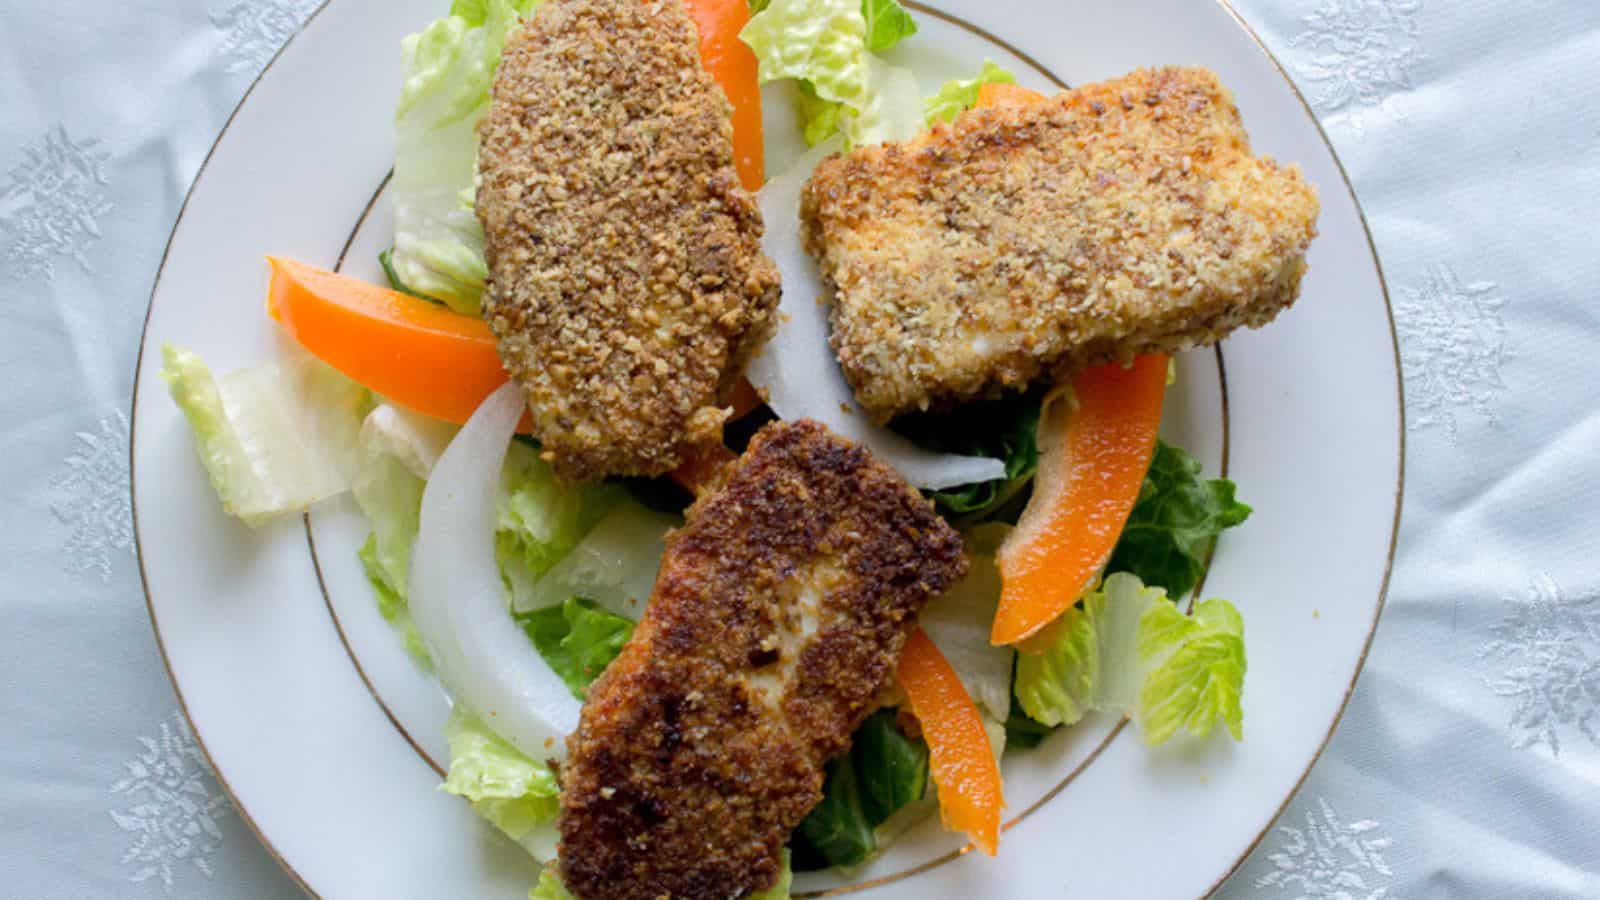 Hanukkah recipes for fried fish sticks with salad on a plate.